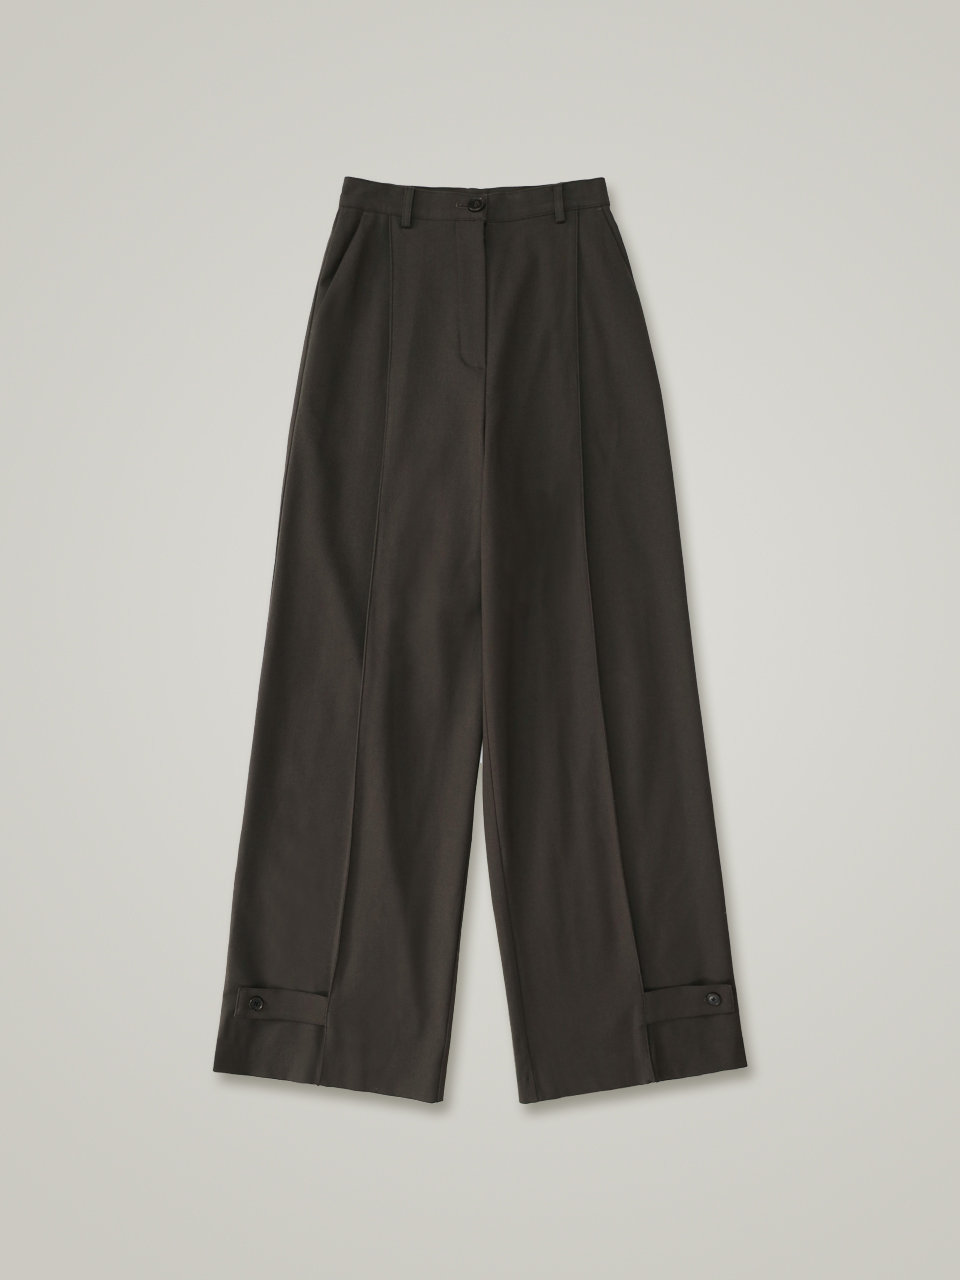 comos 964 button 2-way wool pants (taupe brown)